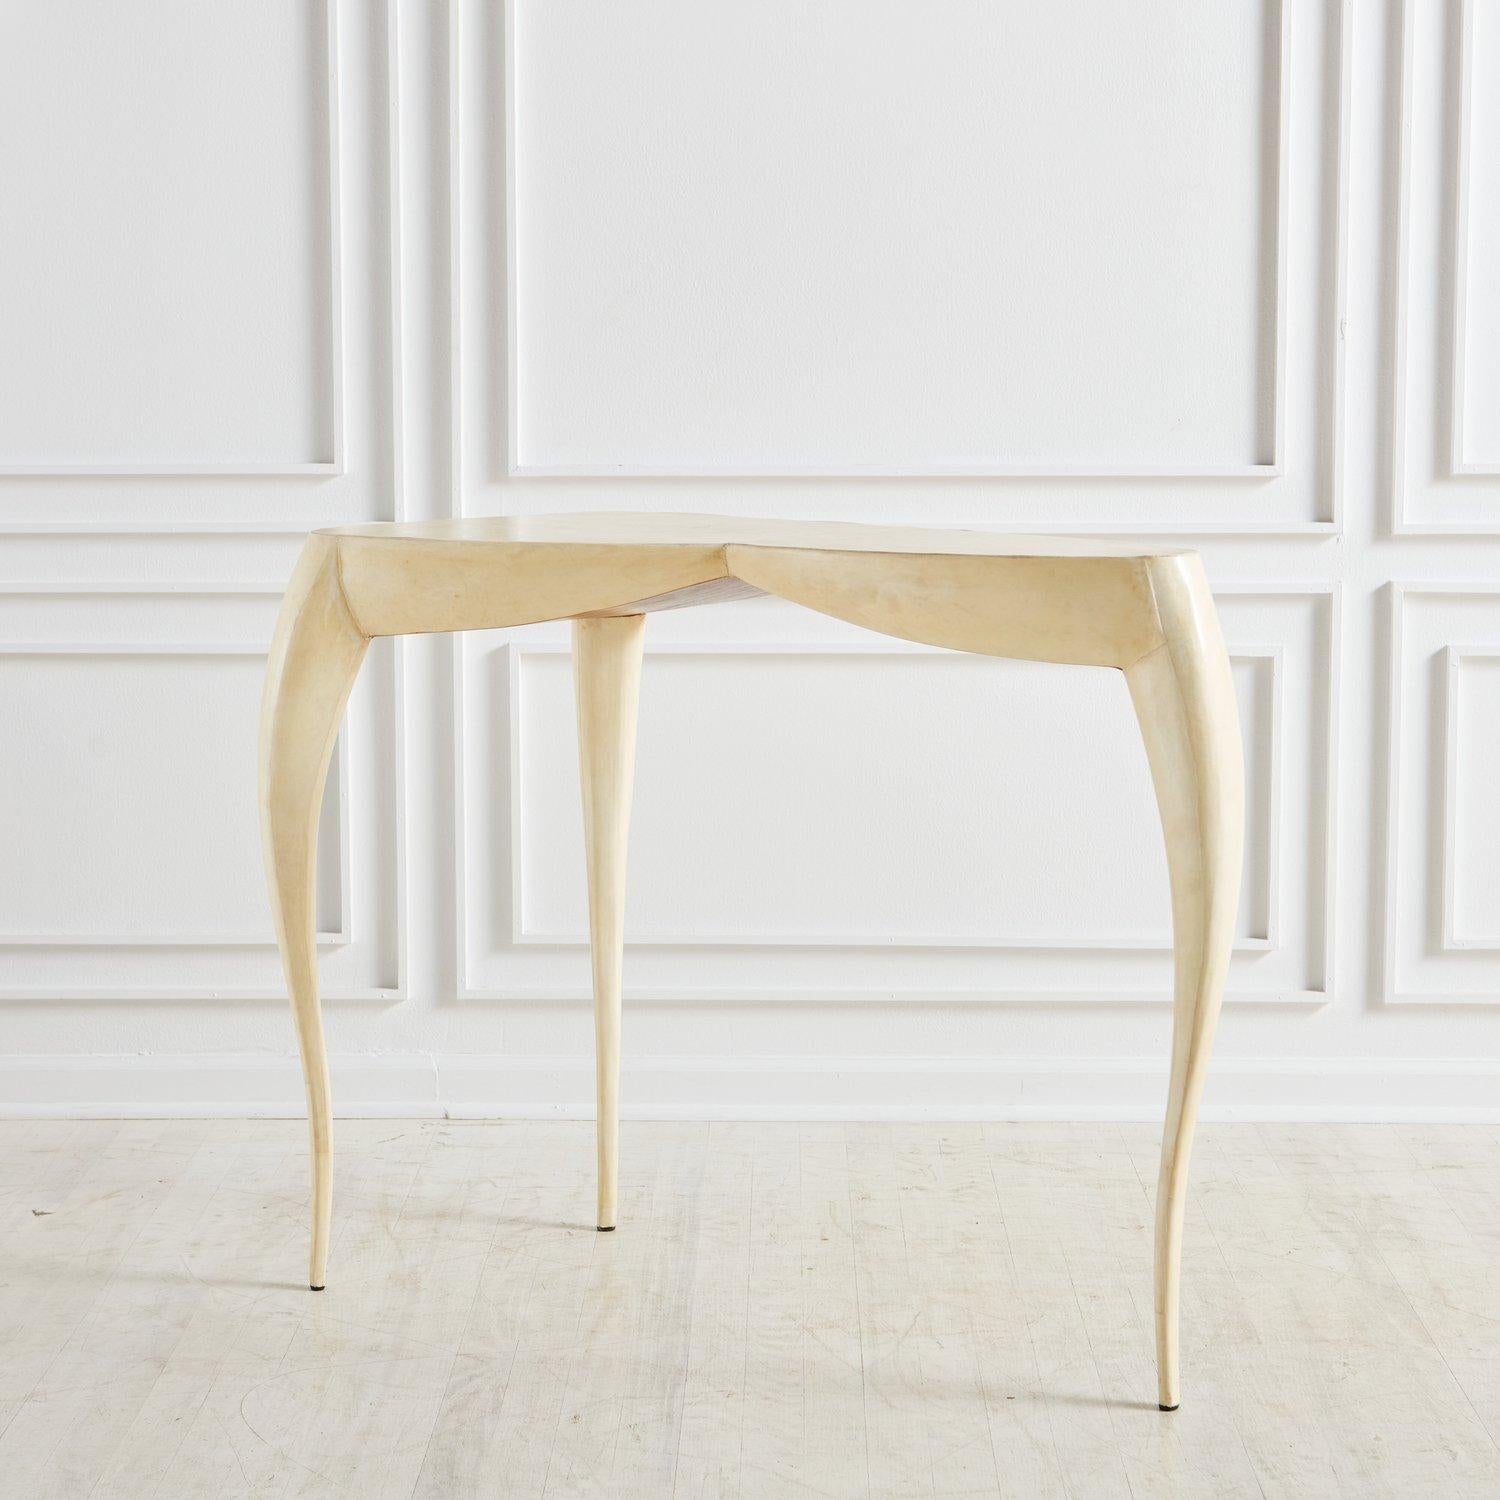 A gorgeous French modern console table by R&Y Augousti, Paris. This table was constructed with wood clad in shagreen leather sheets and features organic shapes and three curved legs. Ria and Yiouri Augousti are known for their revival of artisanal